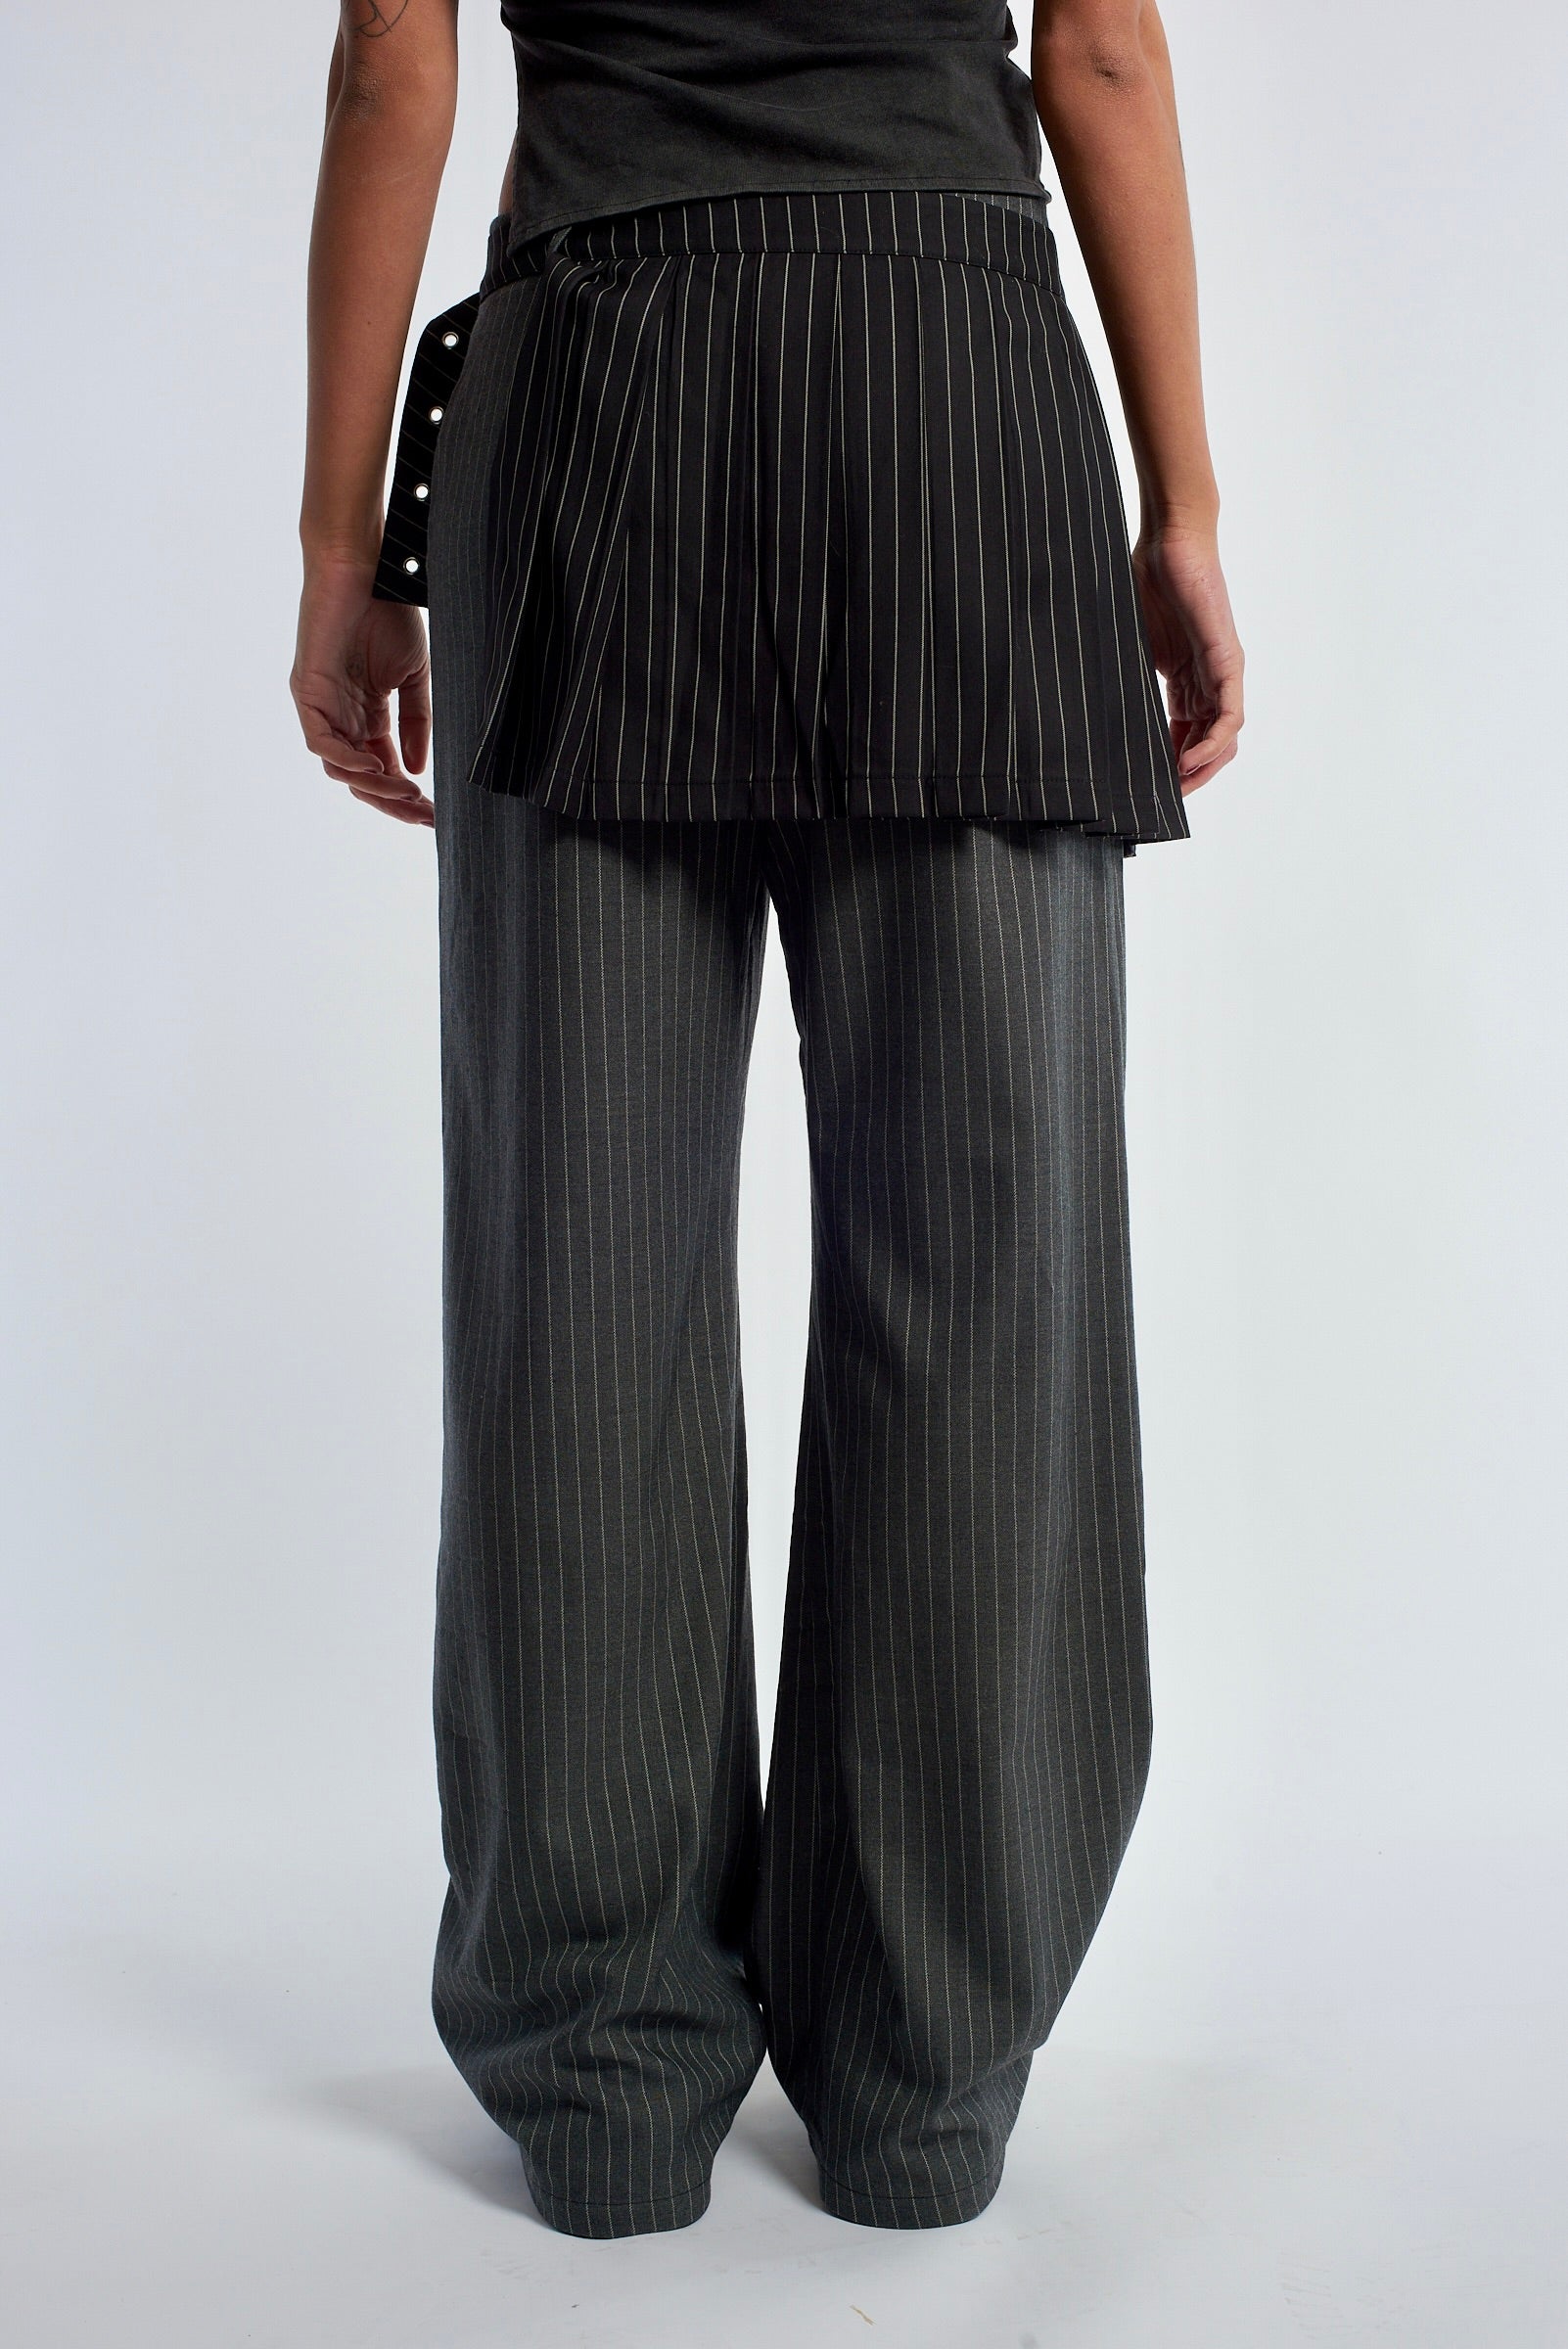 REMOTE PINSTRIPE SKIRT OVER TROUSER - EXCLUSIVE Pants from THE RAGGED PRIEST - Just €89! SHOP NOW AT IAMINHATELOVE BOTH IN STORE FOR CYPRUS AND ONLINE WORLDWIDE @ IAMINHATELOVE.COM